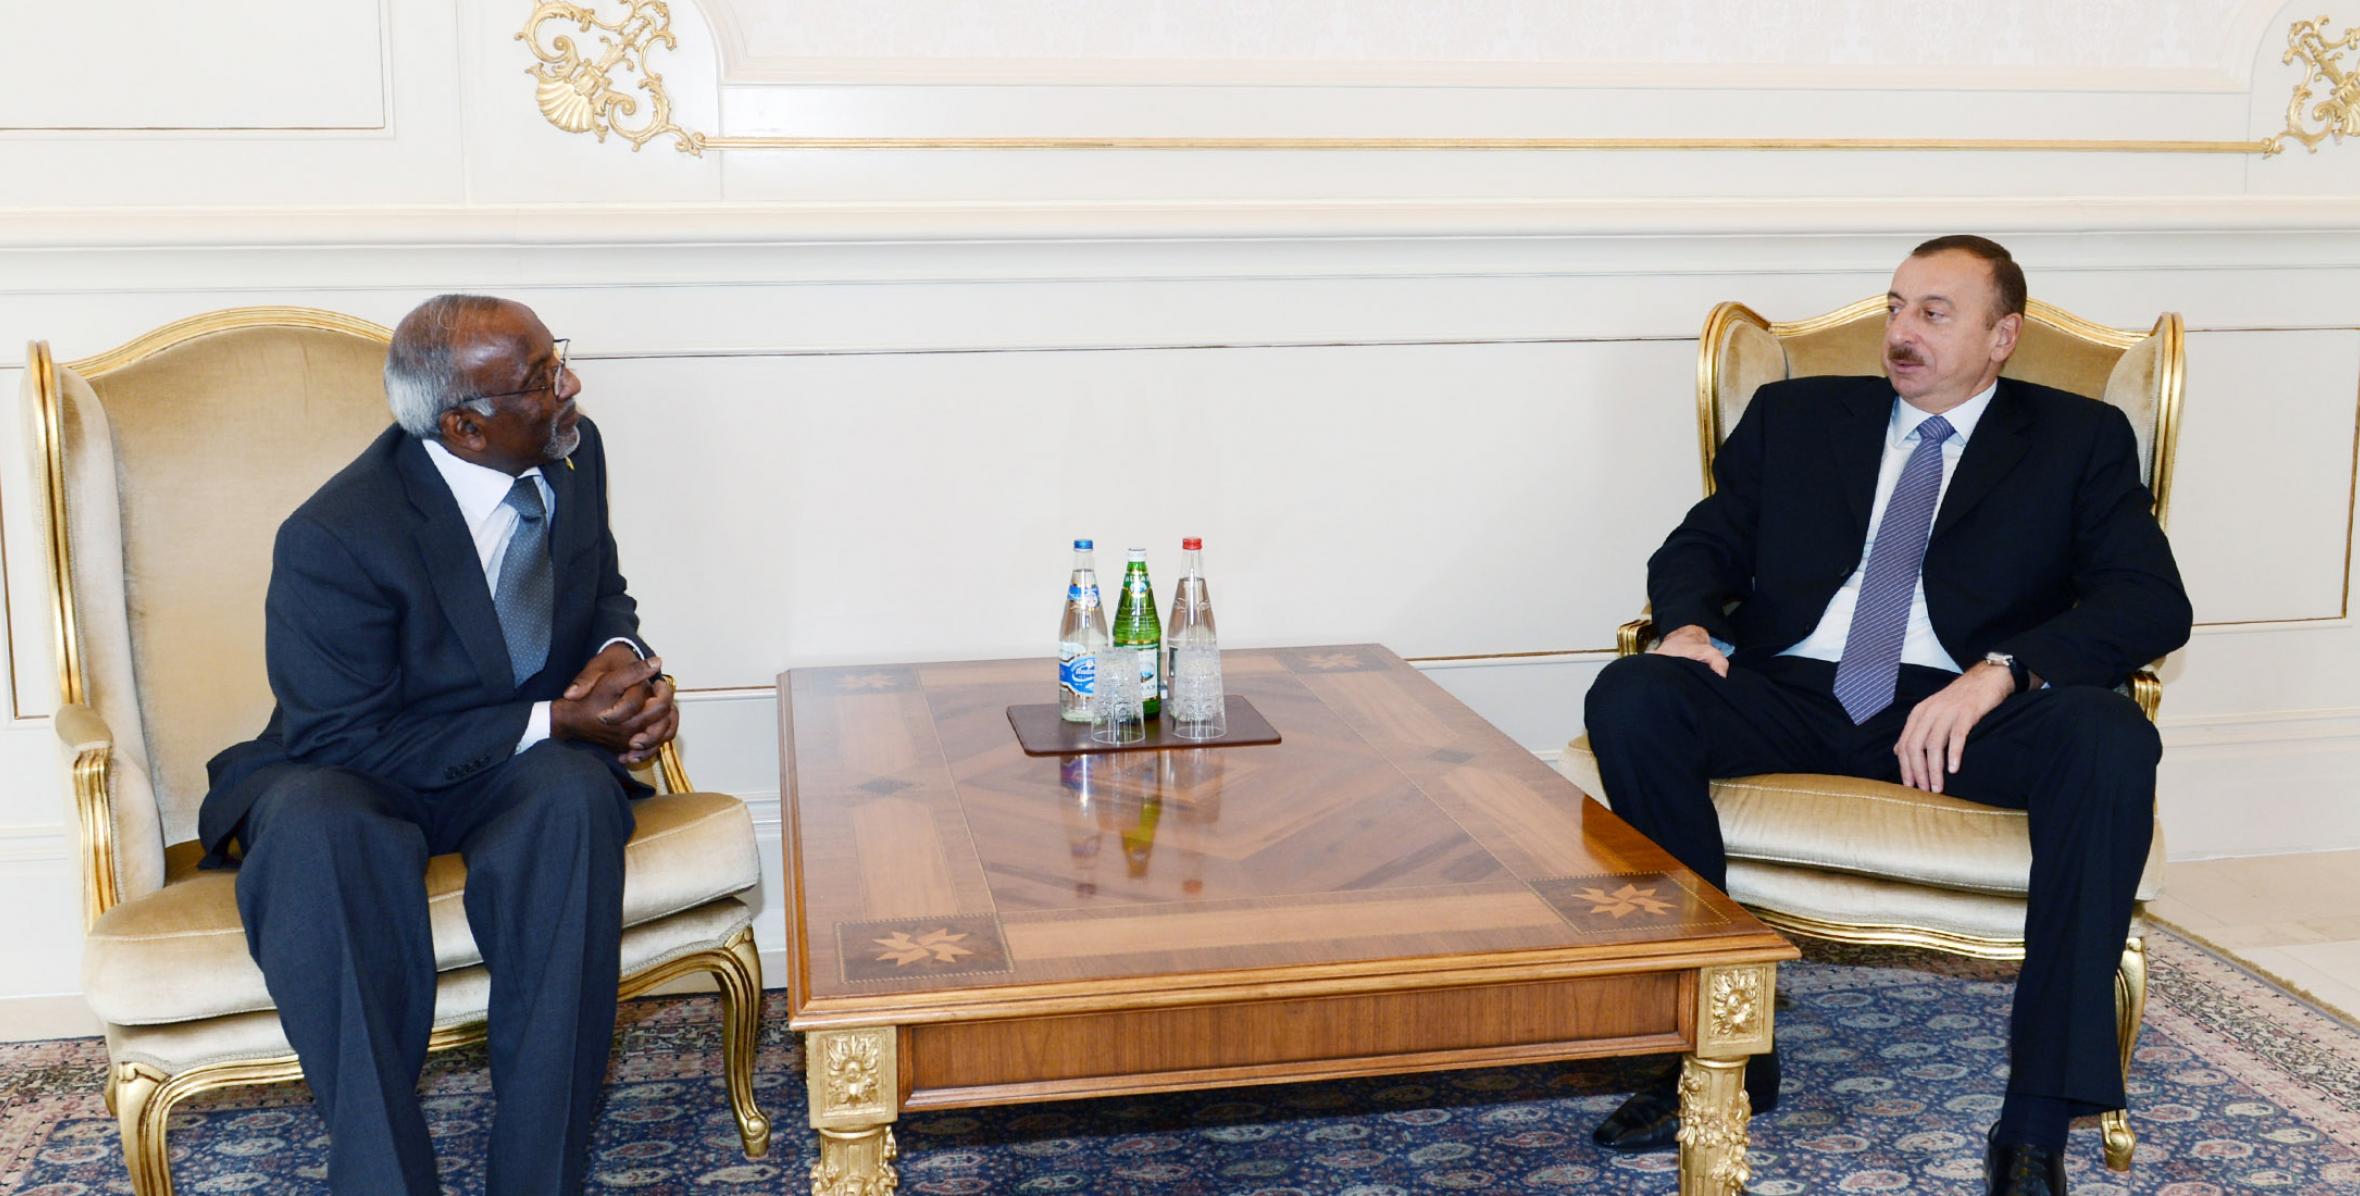 Ilham Aliyev accepted the credentials of a newly-appointed Ambassador Extraordinary and Plenipotentiary of Saint Vincent and Grenadines to Azerbaijan